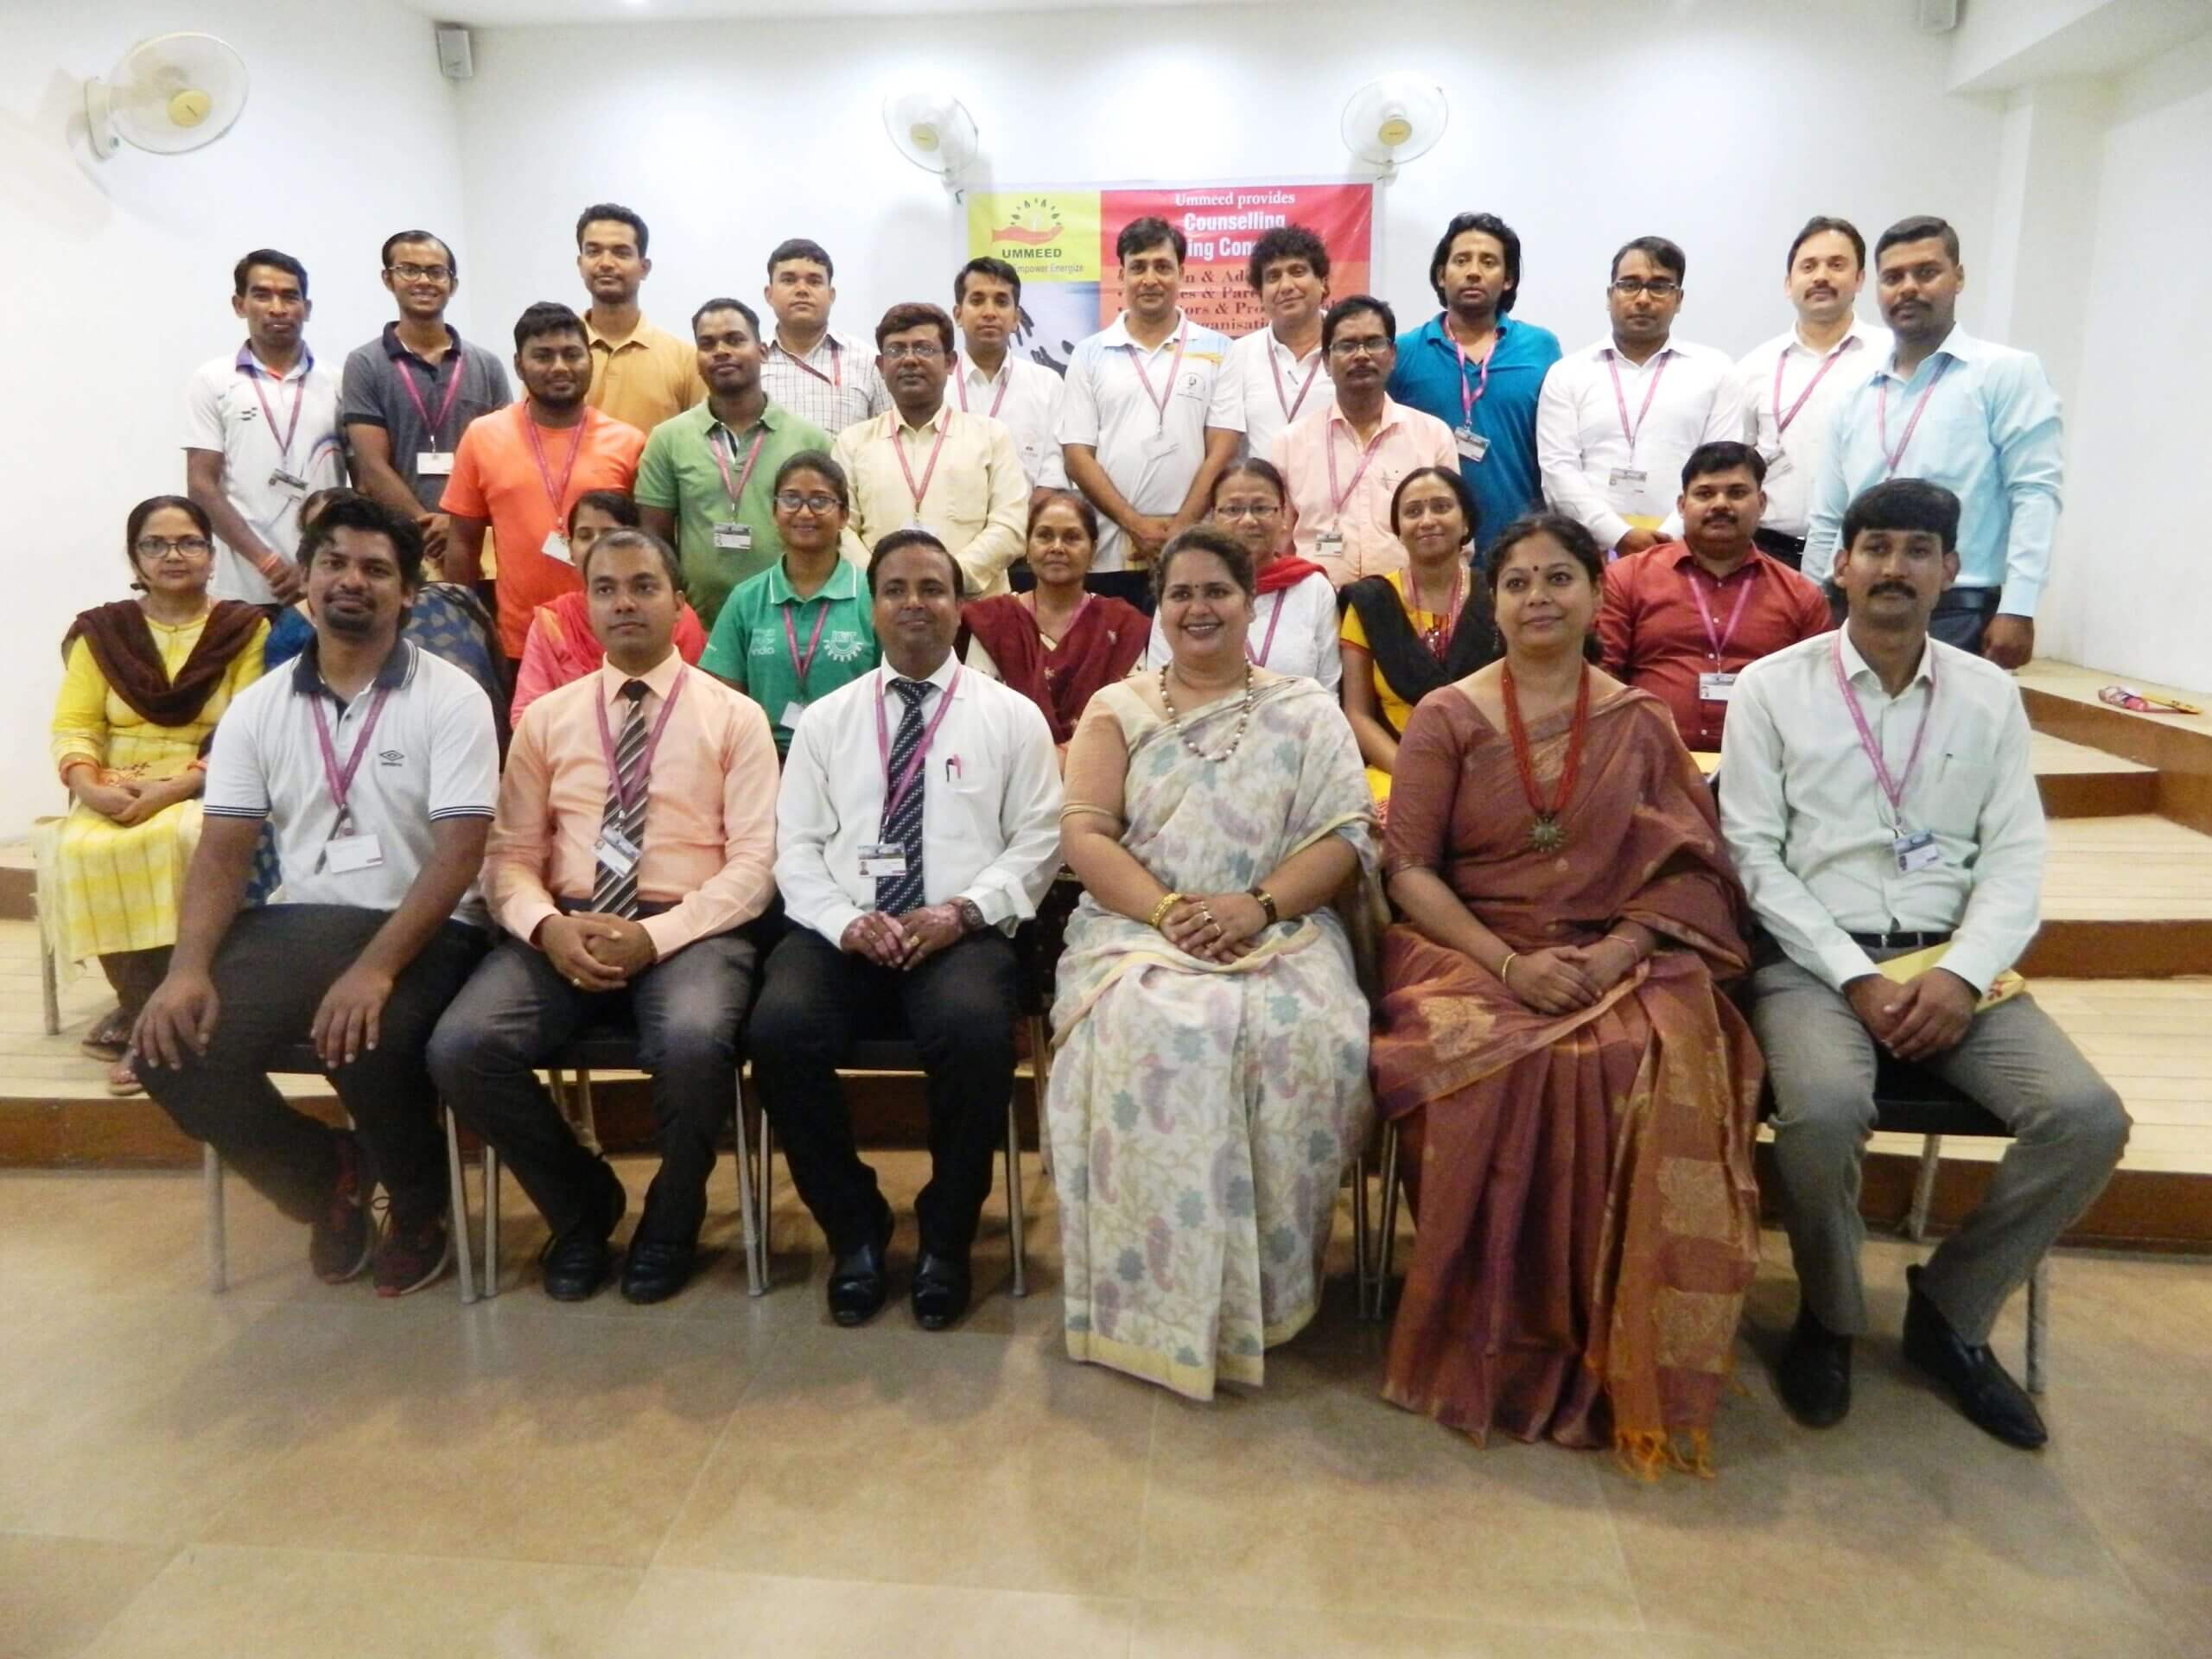 Workshop on Inclusive Education & Adolescence conducted on 6th and 7th June 2018